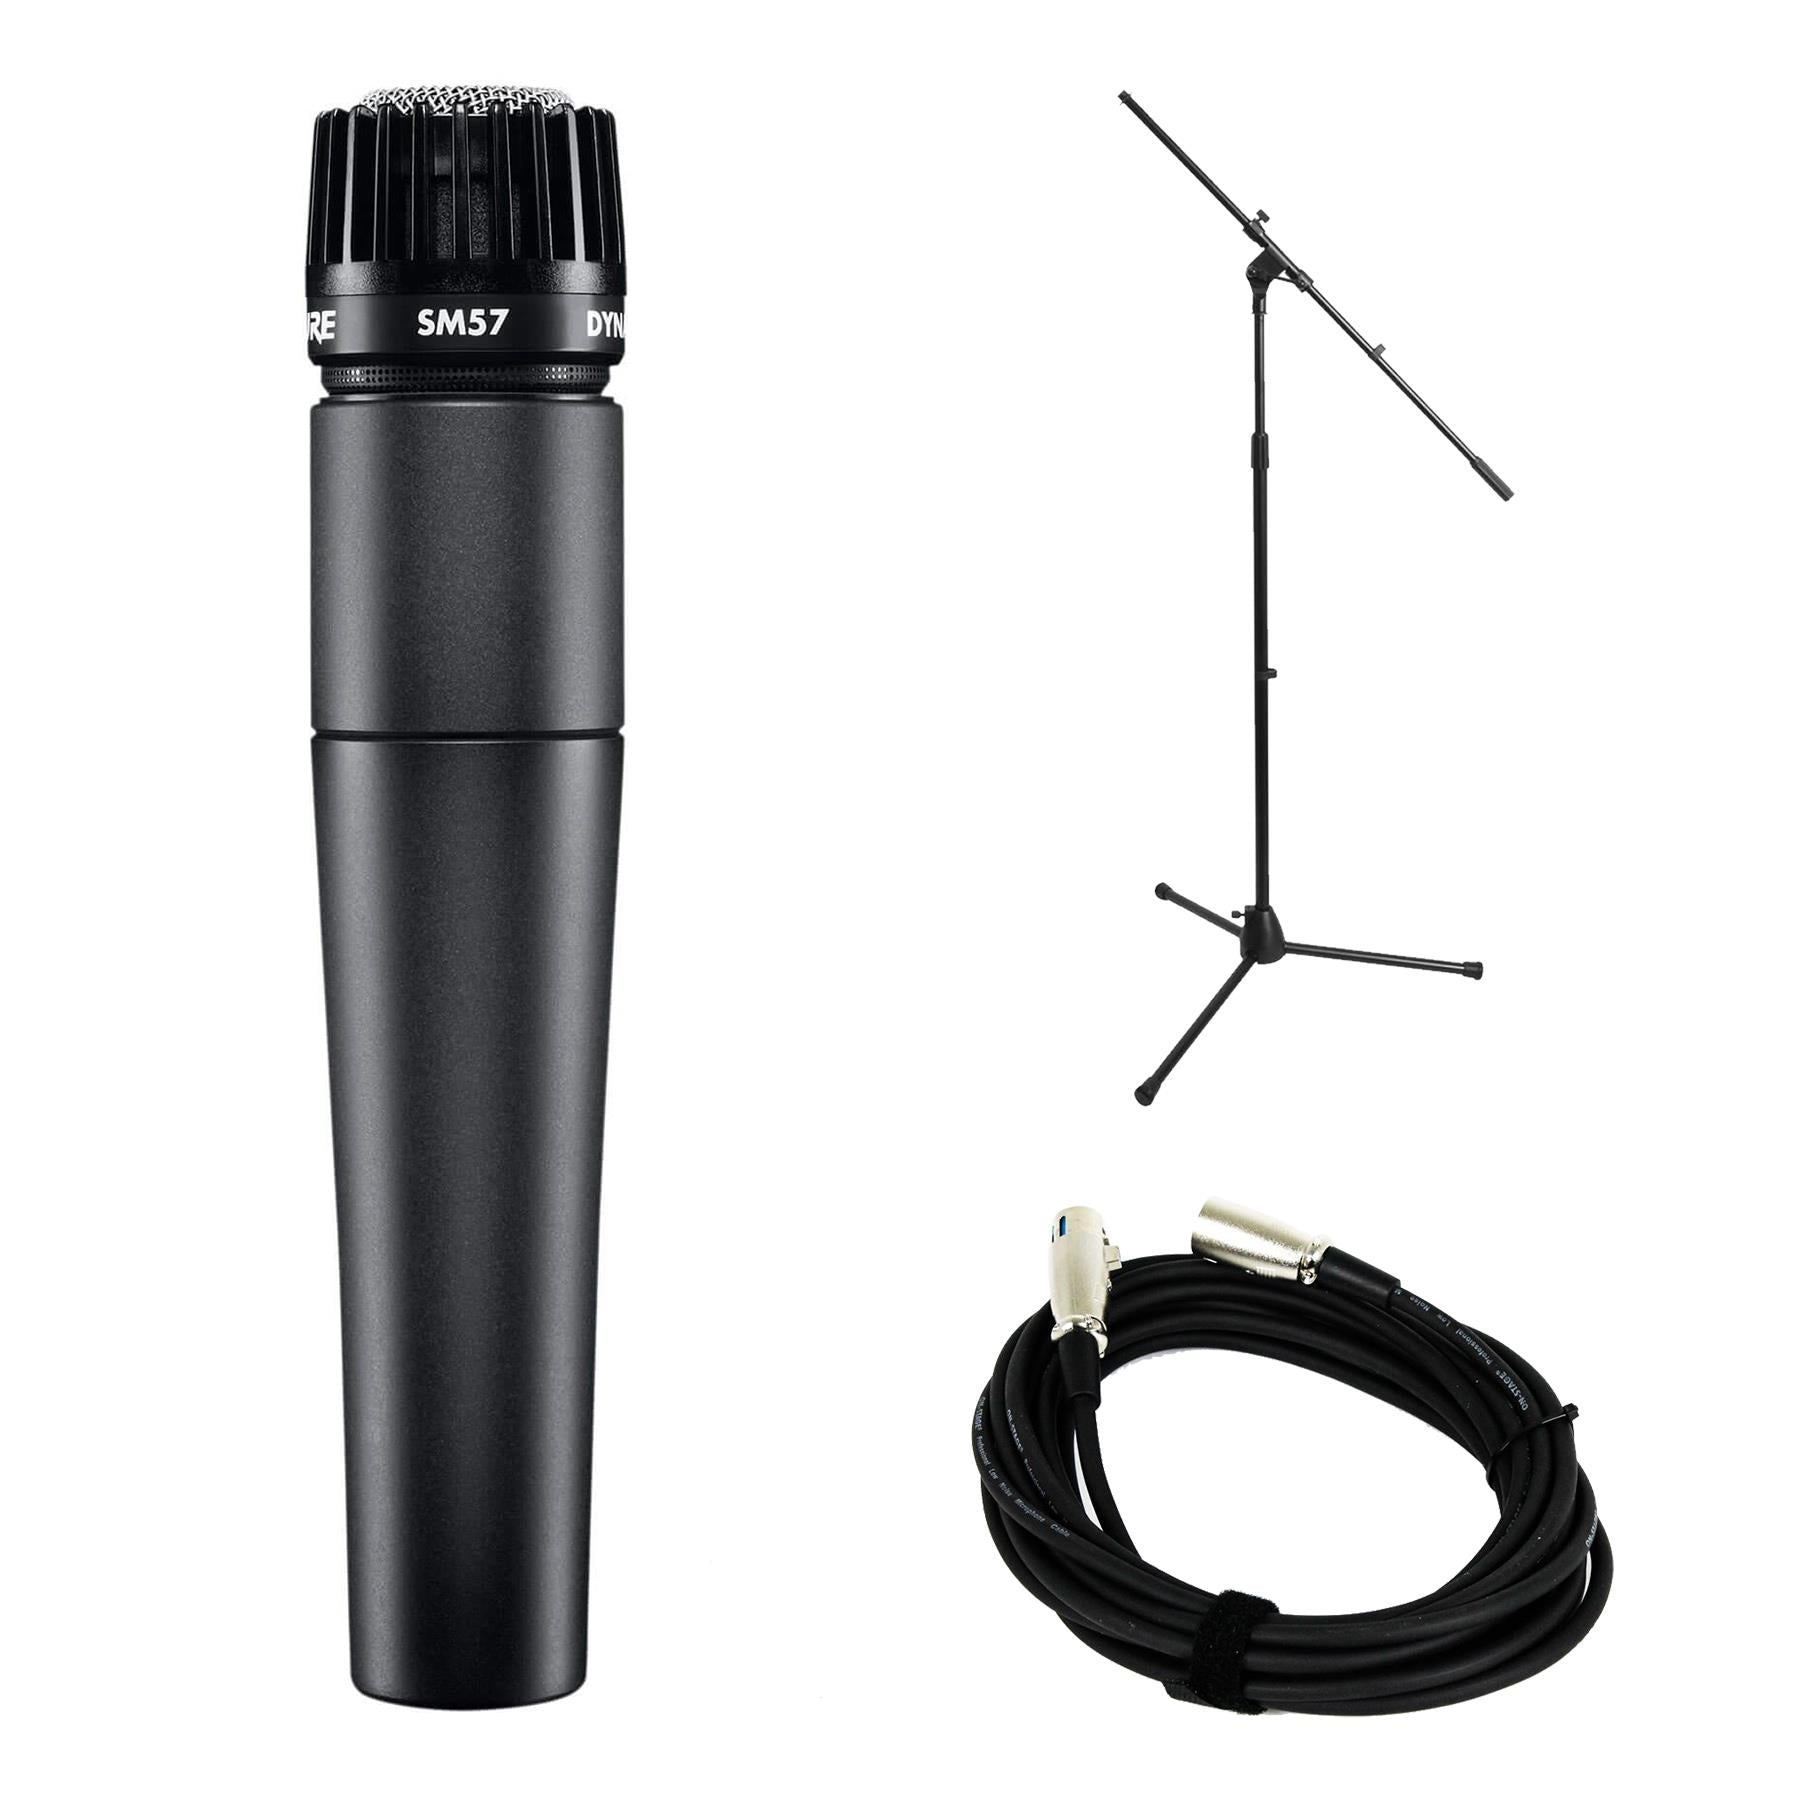  Shure SM57-LC Cardioid Dynamic Instrument Microphone - 2 Pack,  XLR : Musical Instruments